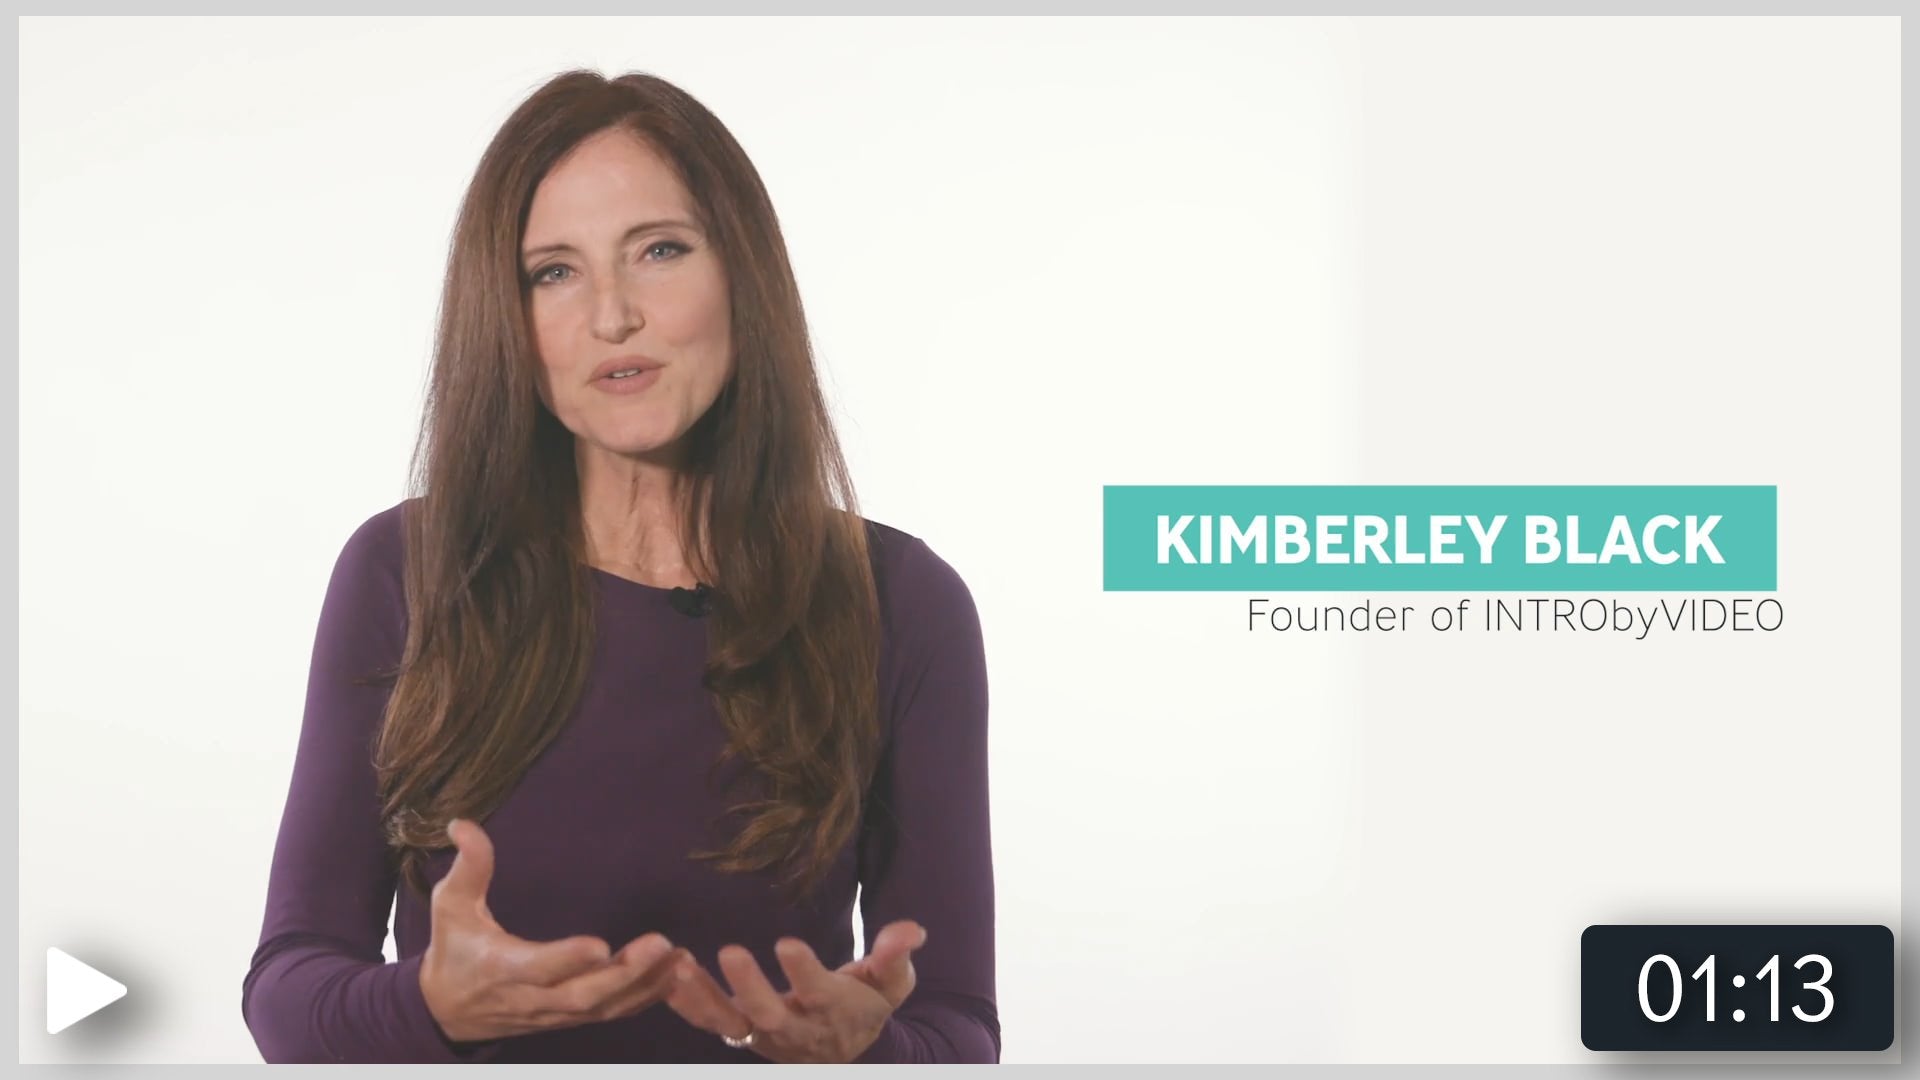 Meet Kimberley Black who introduces the concept of asynchronous video interviews